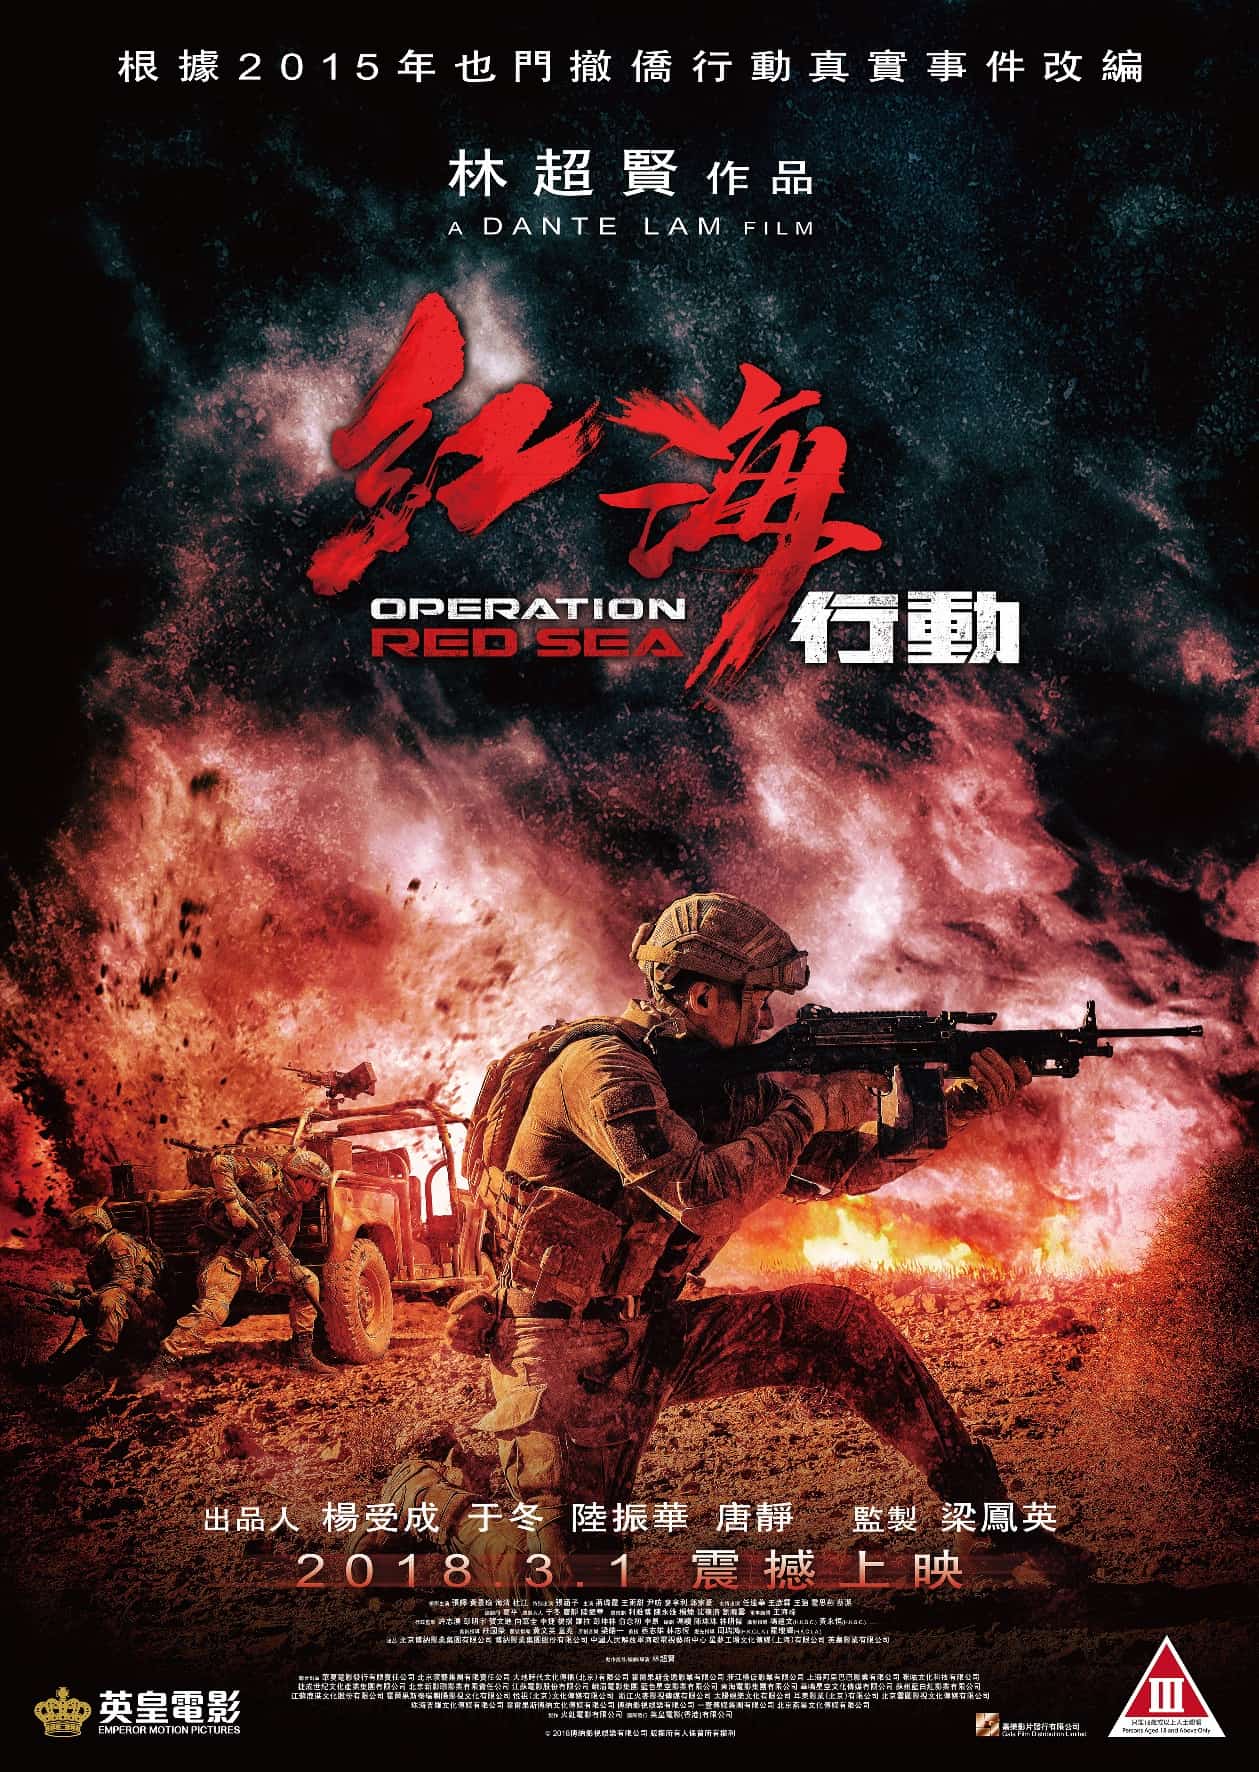 OPERATION RED SEA